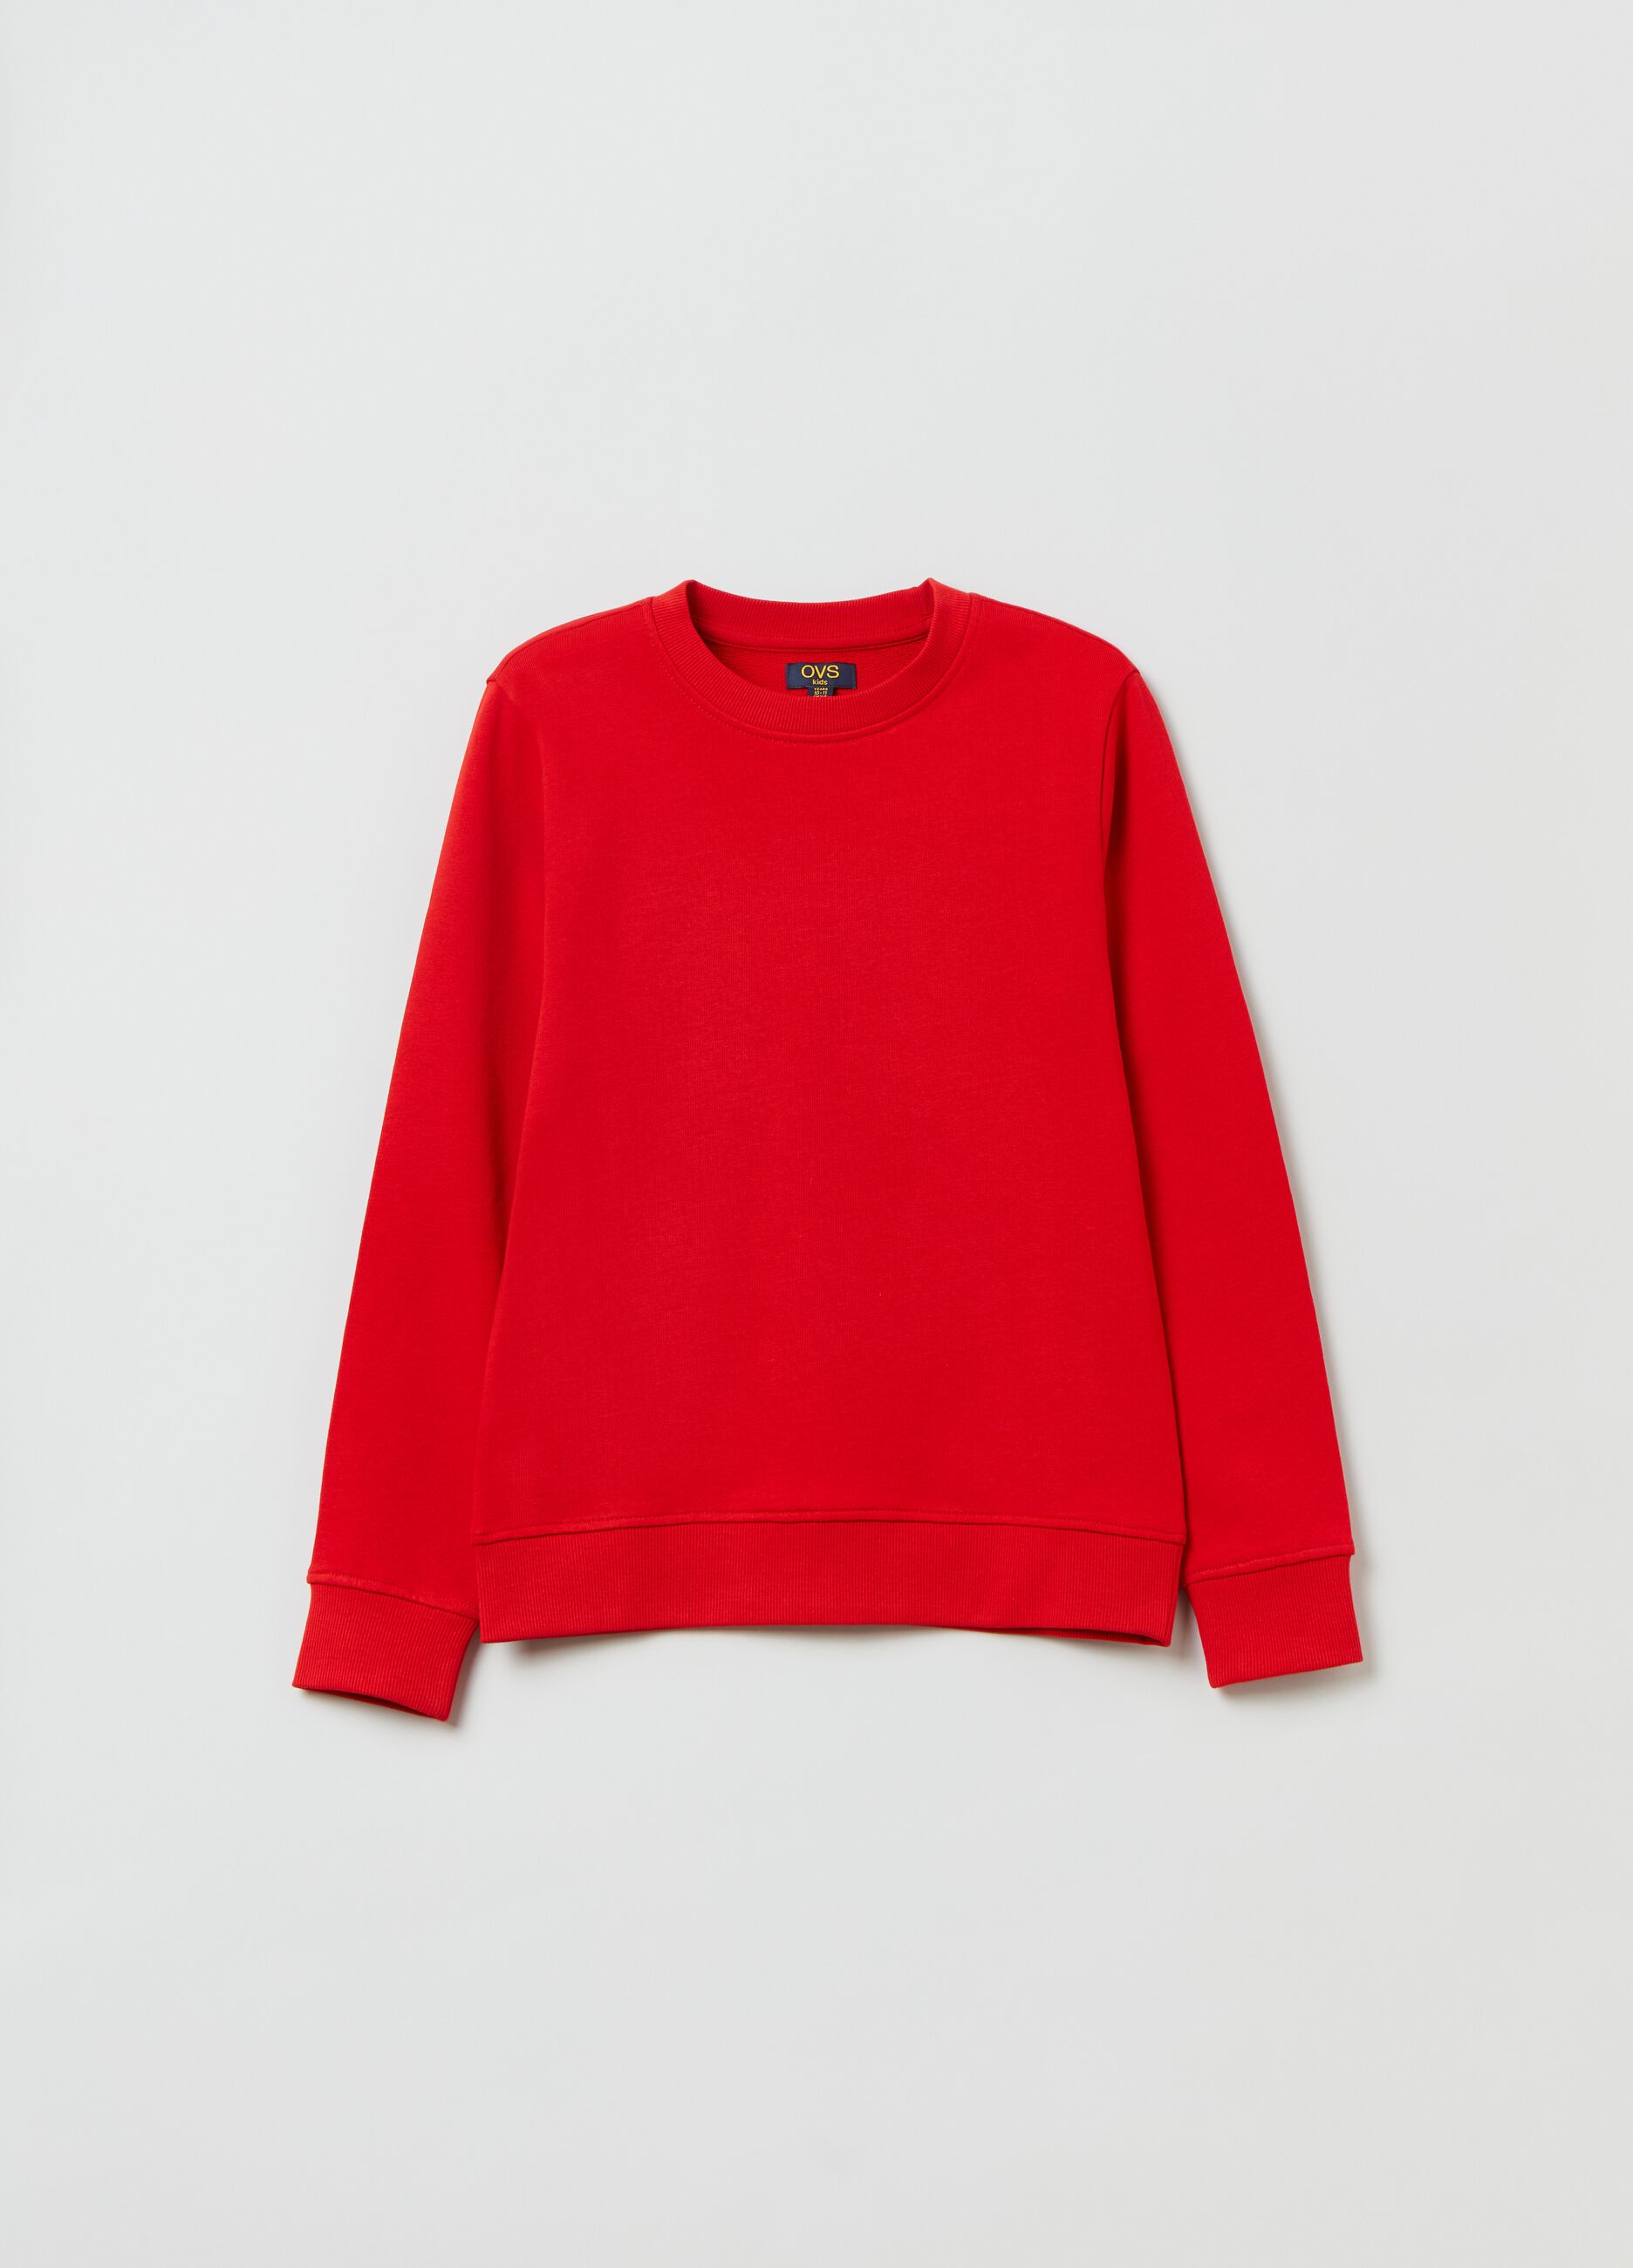 Sweatshirt in French Terry with round neck